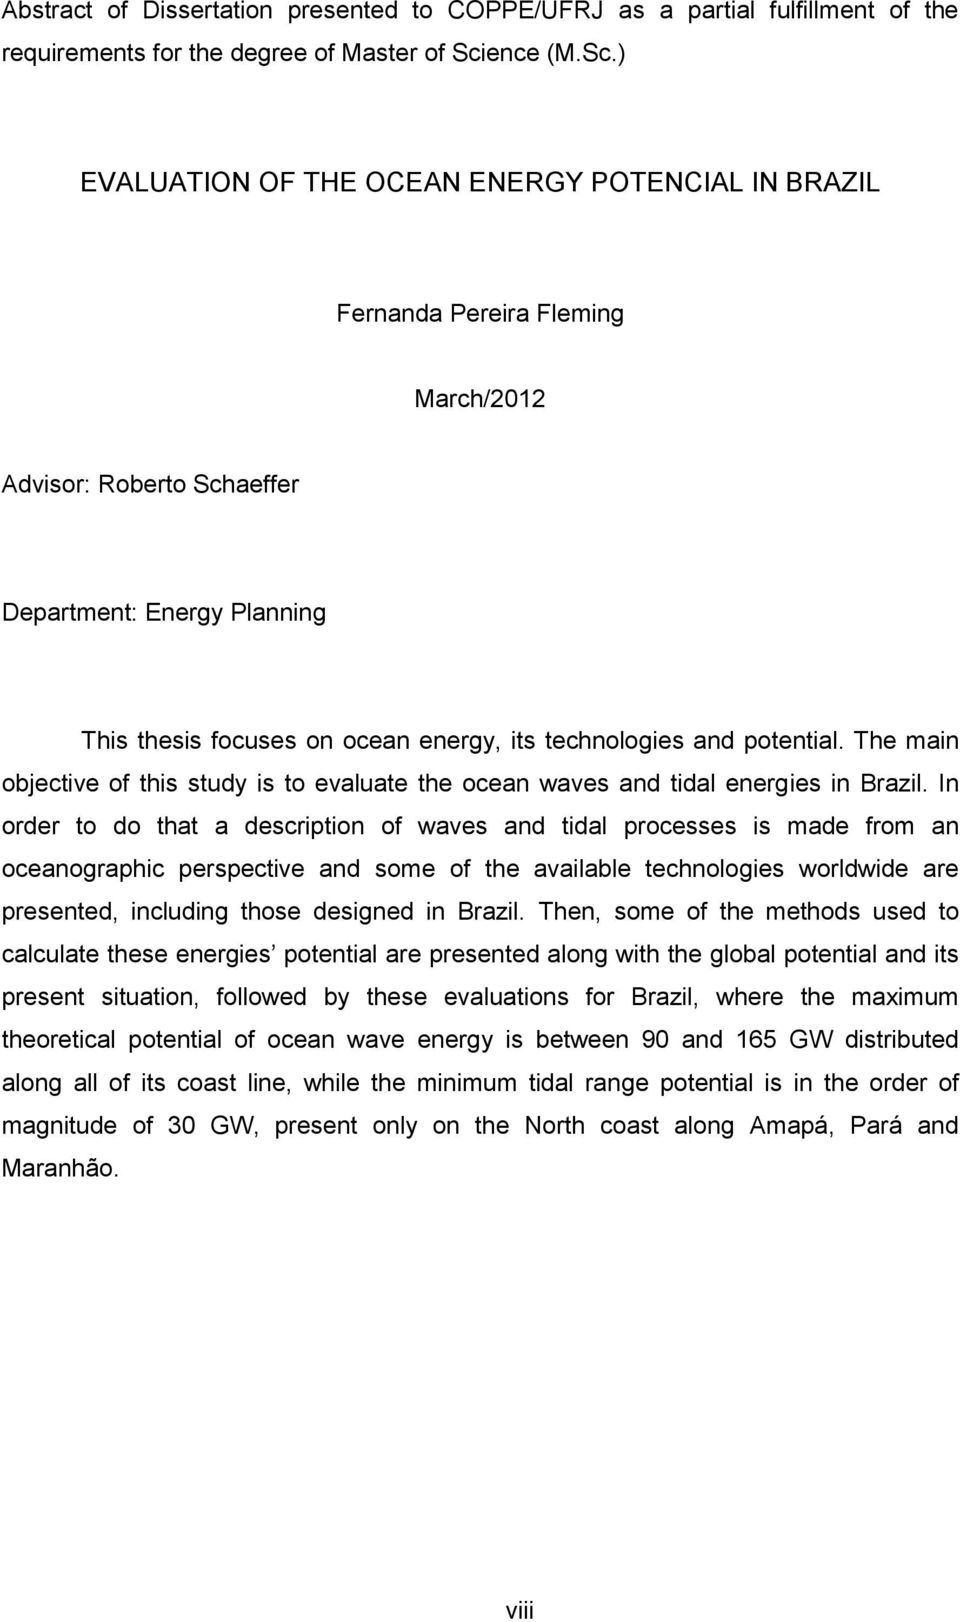 ) EVALUATION OF THE OCEAN ENERGY POTENCIAL IN BRAZIL Fernanda Pereira Fleming March/2012 Advisor: Roberto Schaeffer Department: Energy Planning This thesis focuses on ocean energy, its technologies